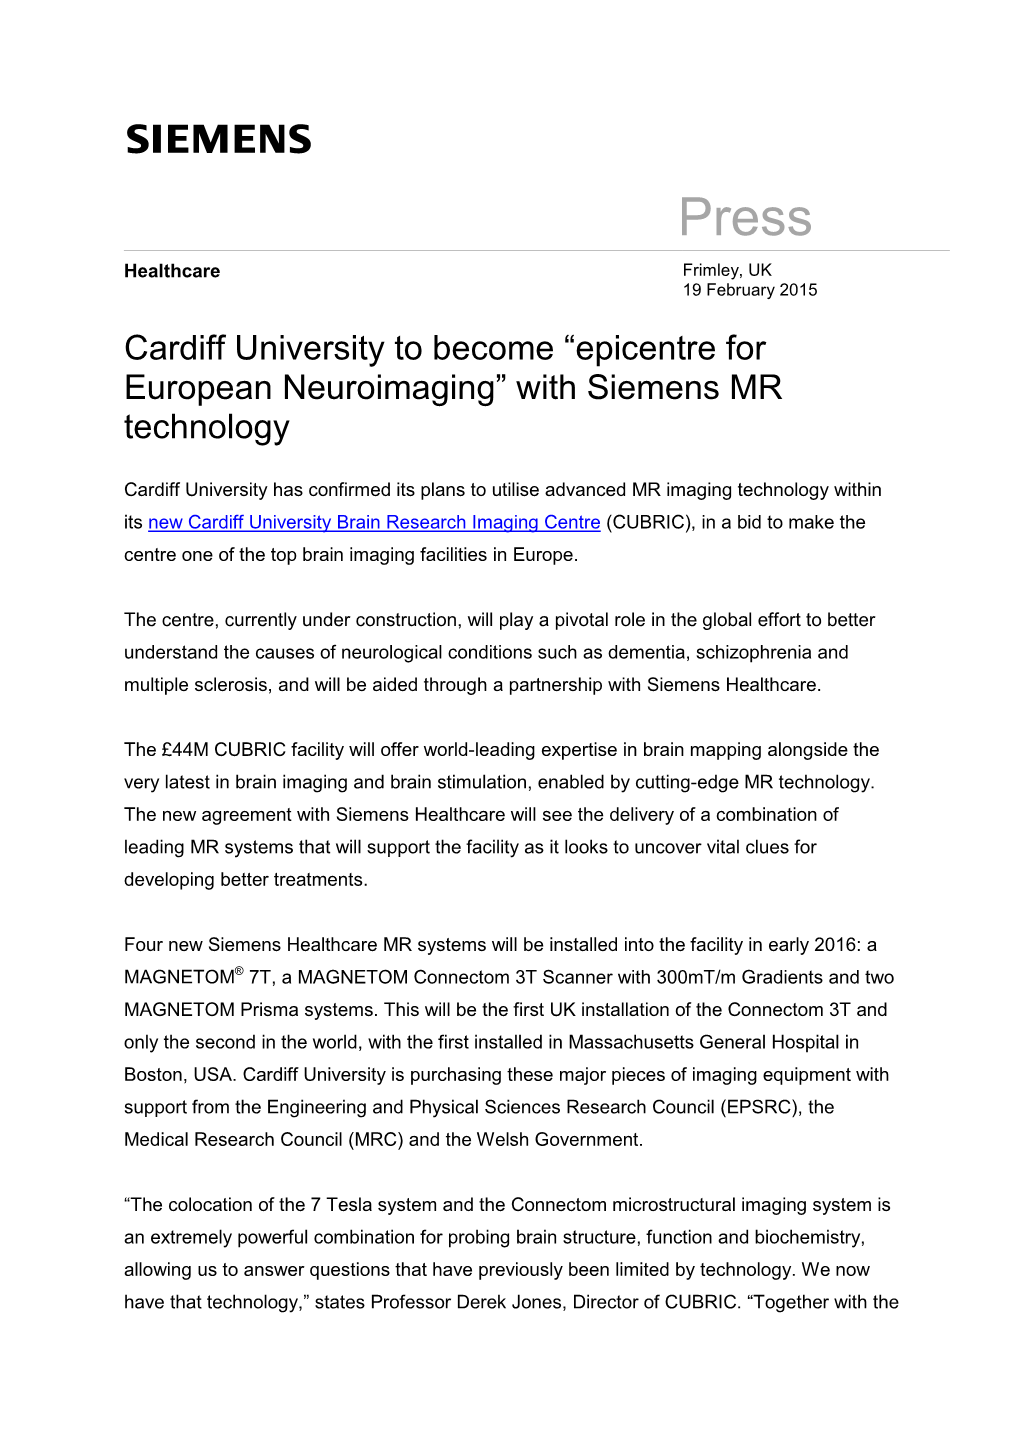 Cardiff University to Become “Epicentre for European Neuroimaging” with Siemens MR Technology